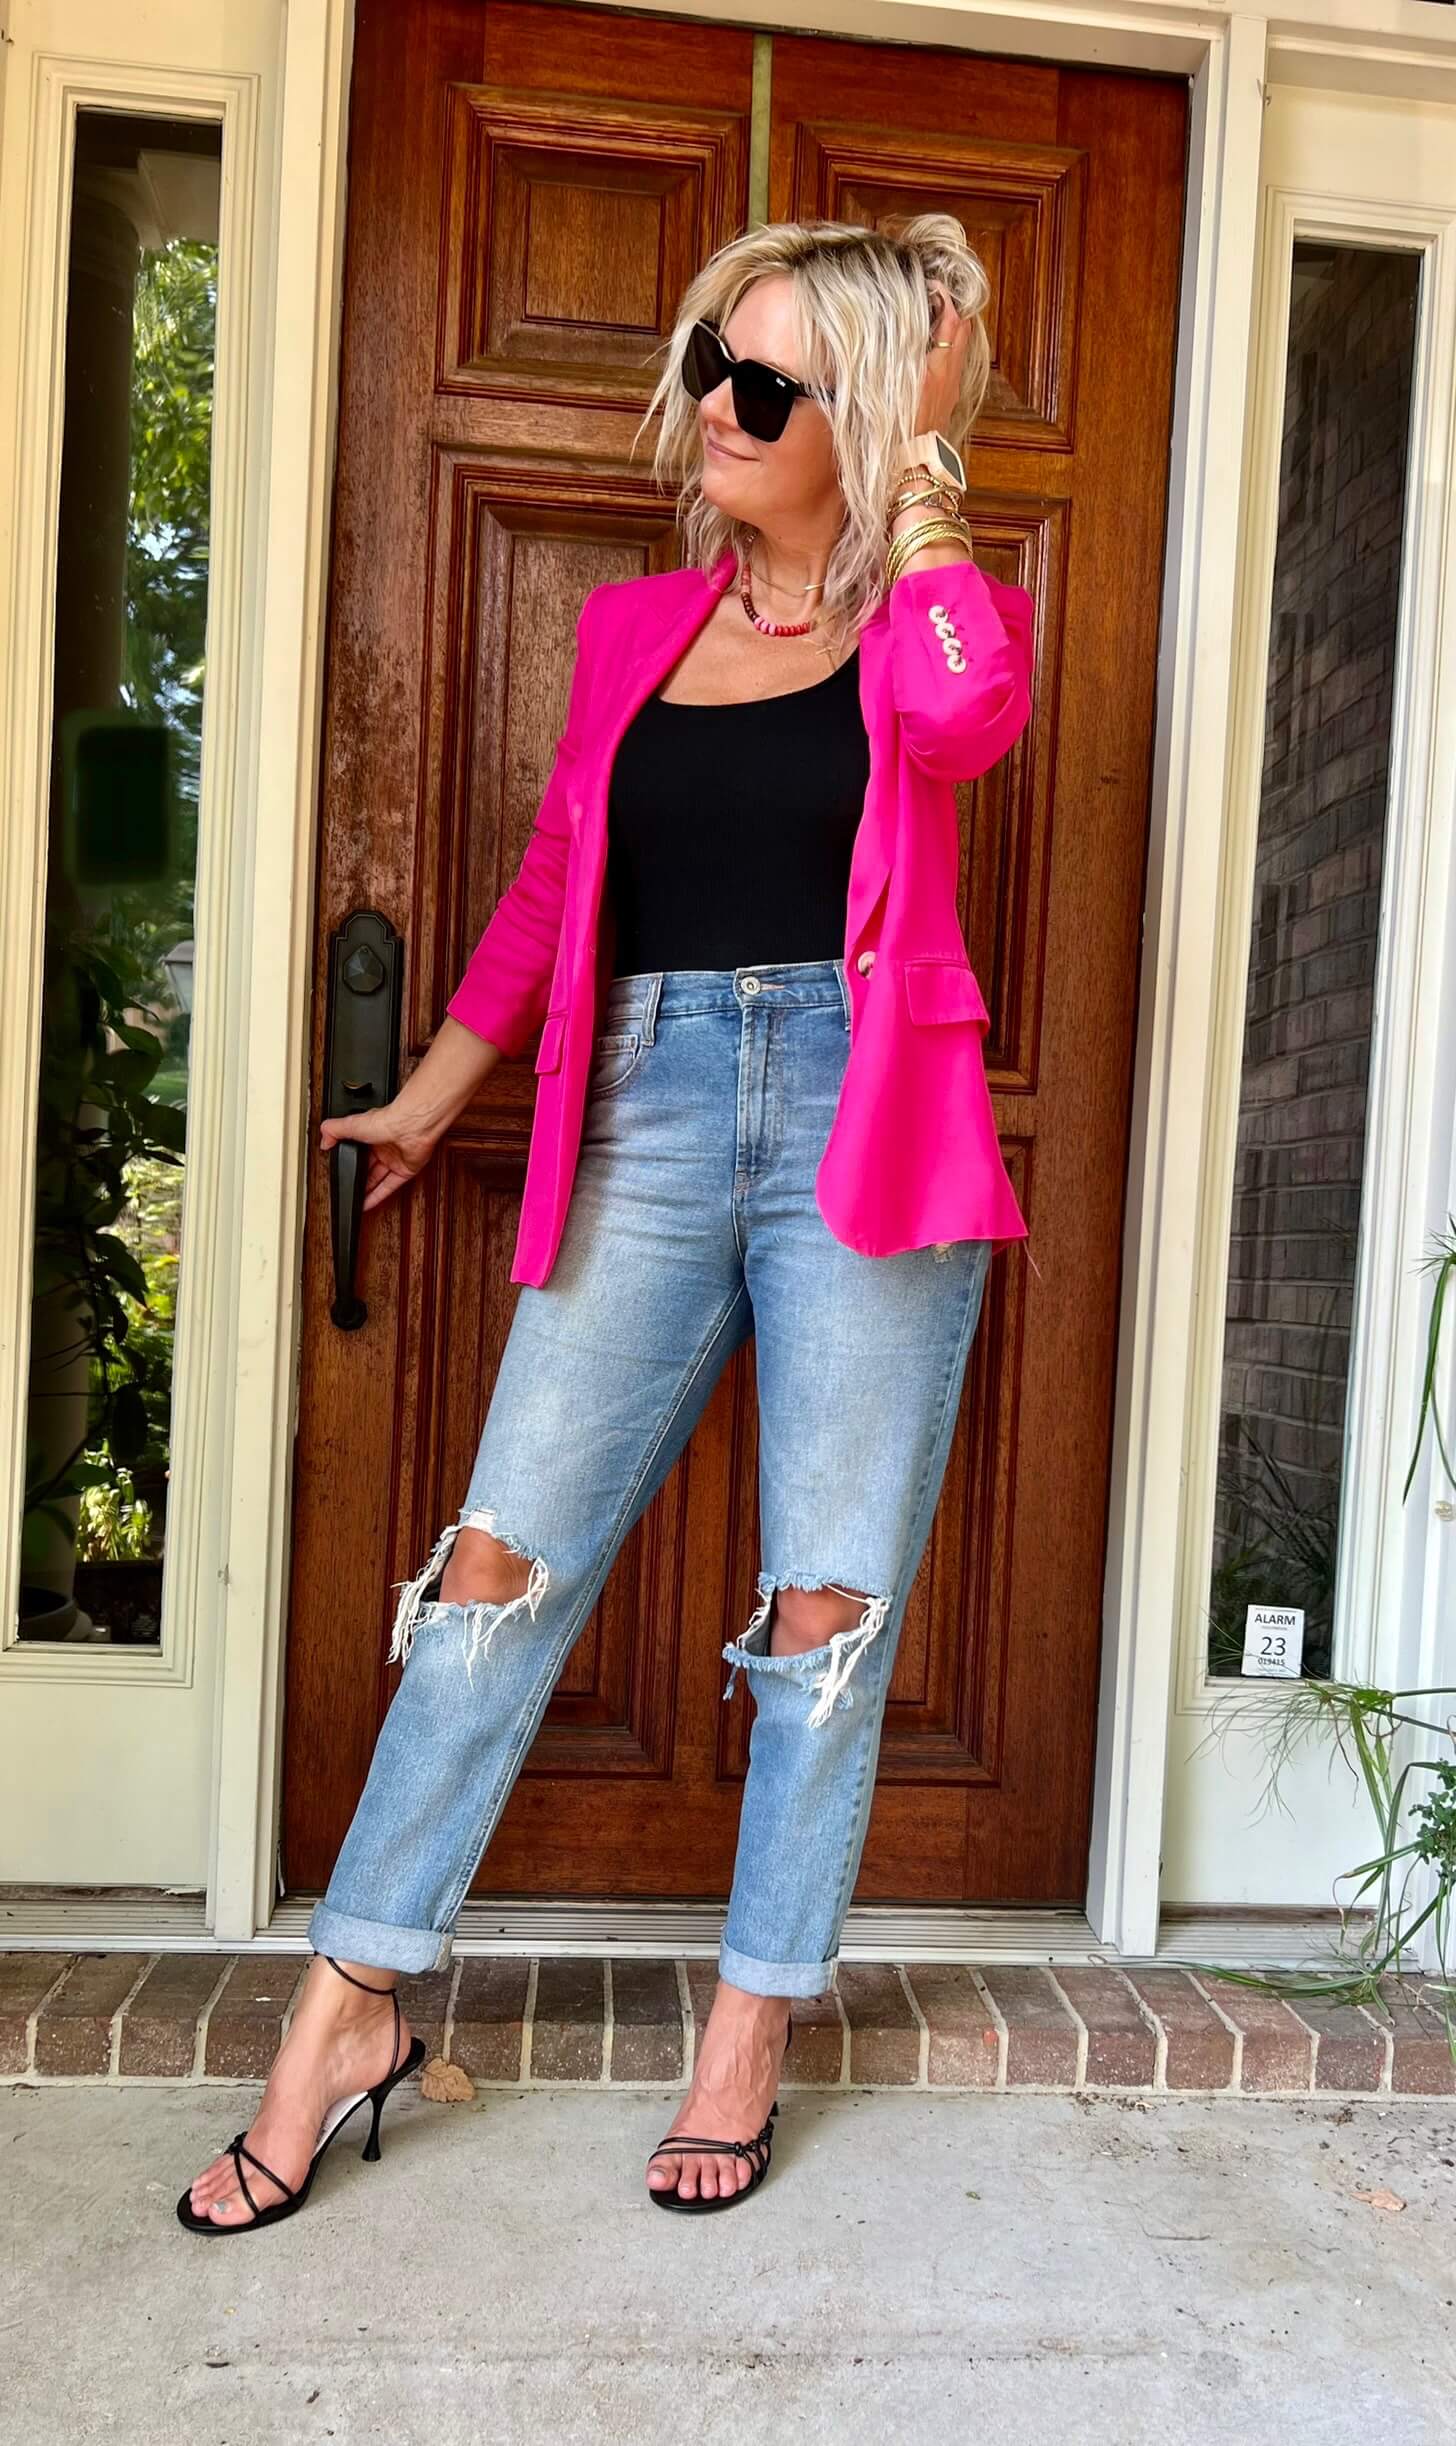 how to dress up distressed denim how to wear distressed jeans for date night fun date night look with jeans how to wear jeans and strappy sandals how to style a bodysuit fun girls night look what to wear for girls night